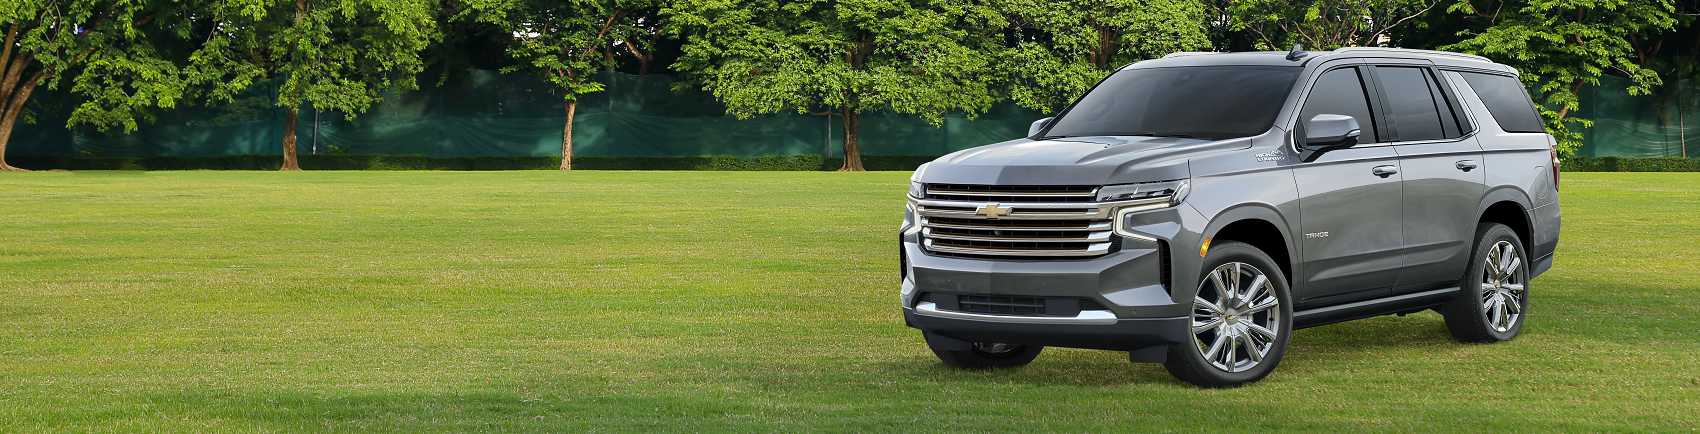 Chevy Tahoe Reviews Avon OH